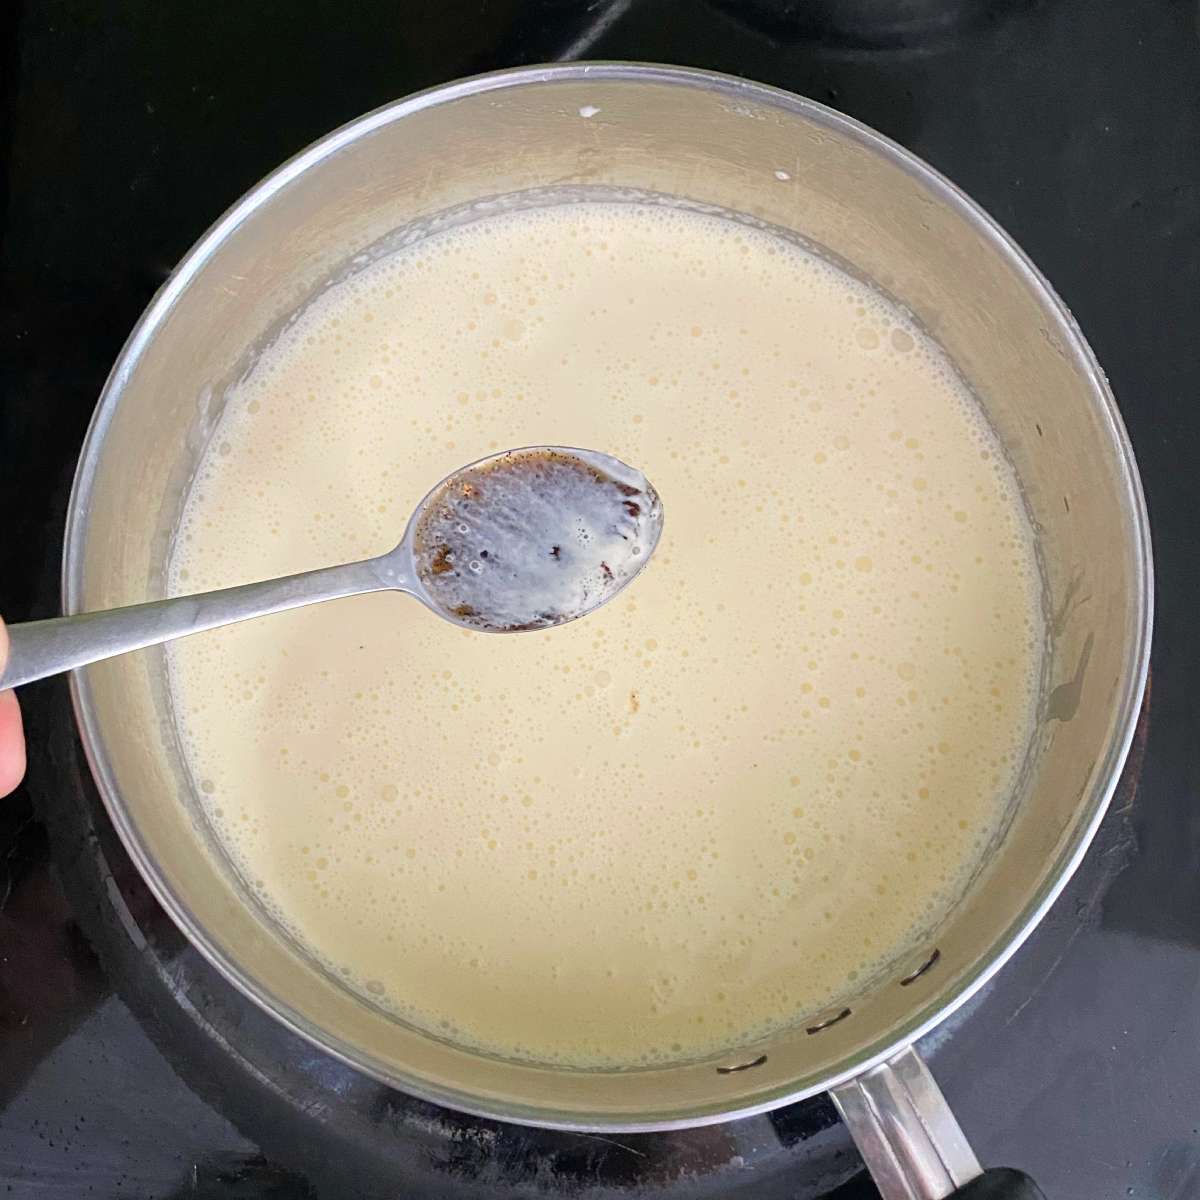 The creme brulee mixture being heated in a pot over a medium heat